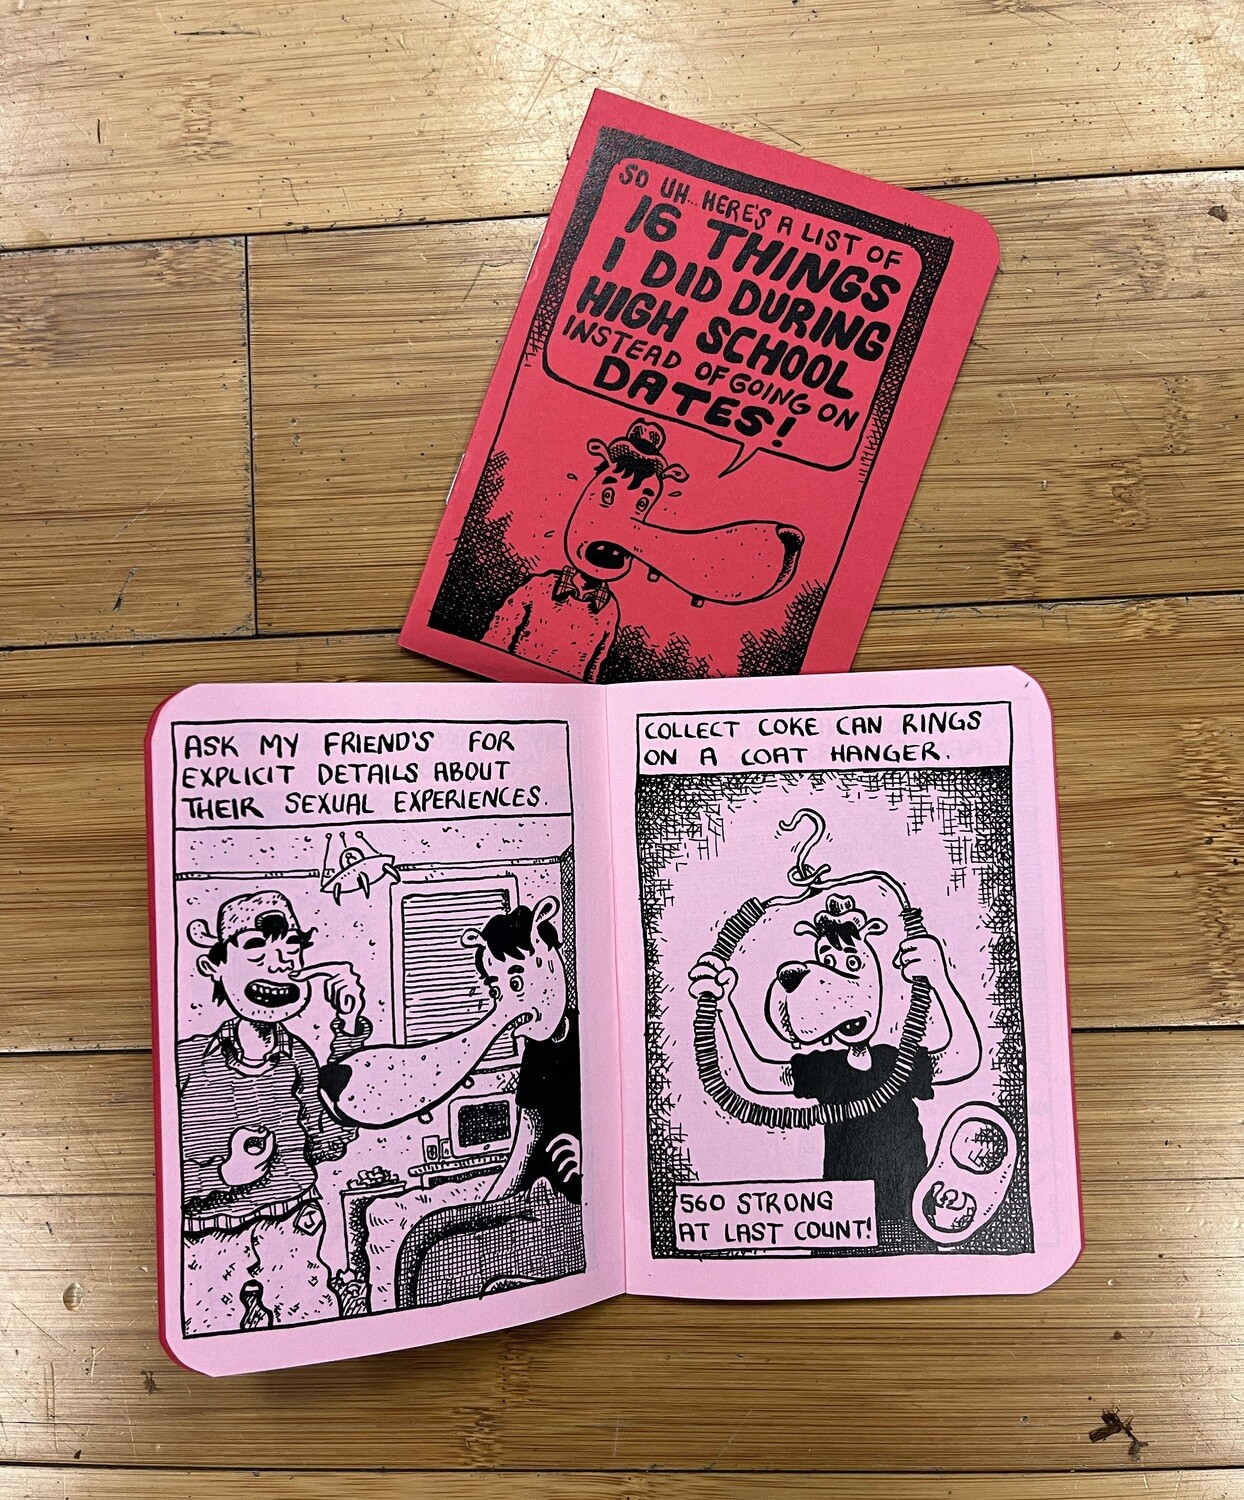 16 Things I Did During High School Instead of Going on Dates - Zine by Max Clotfelter